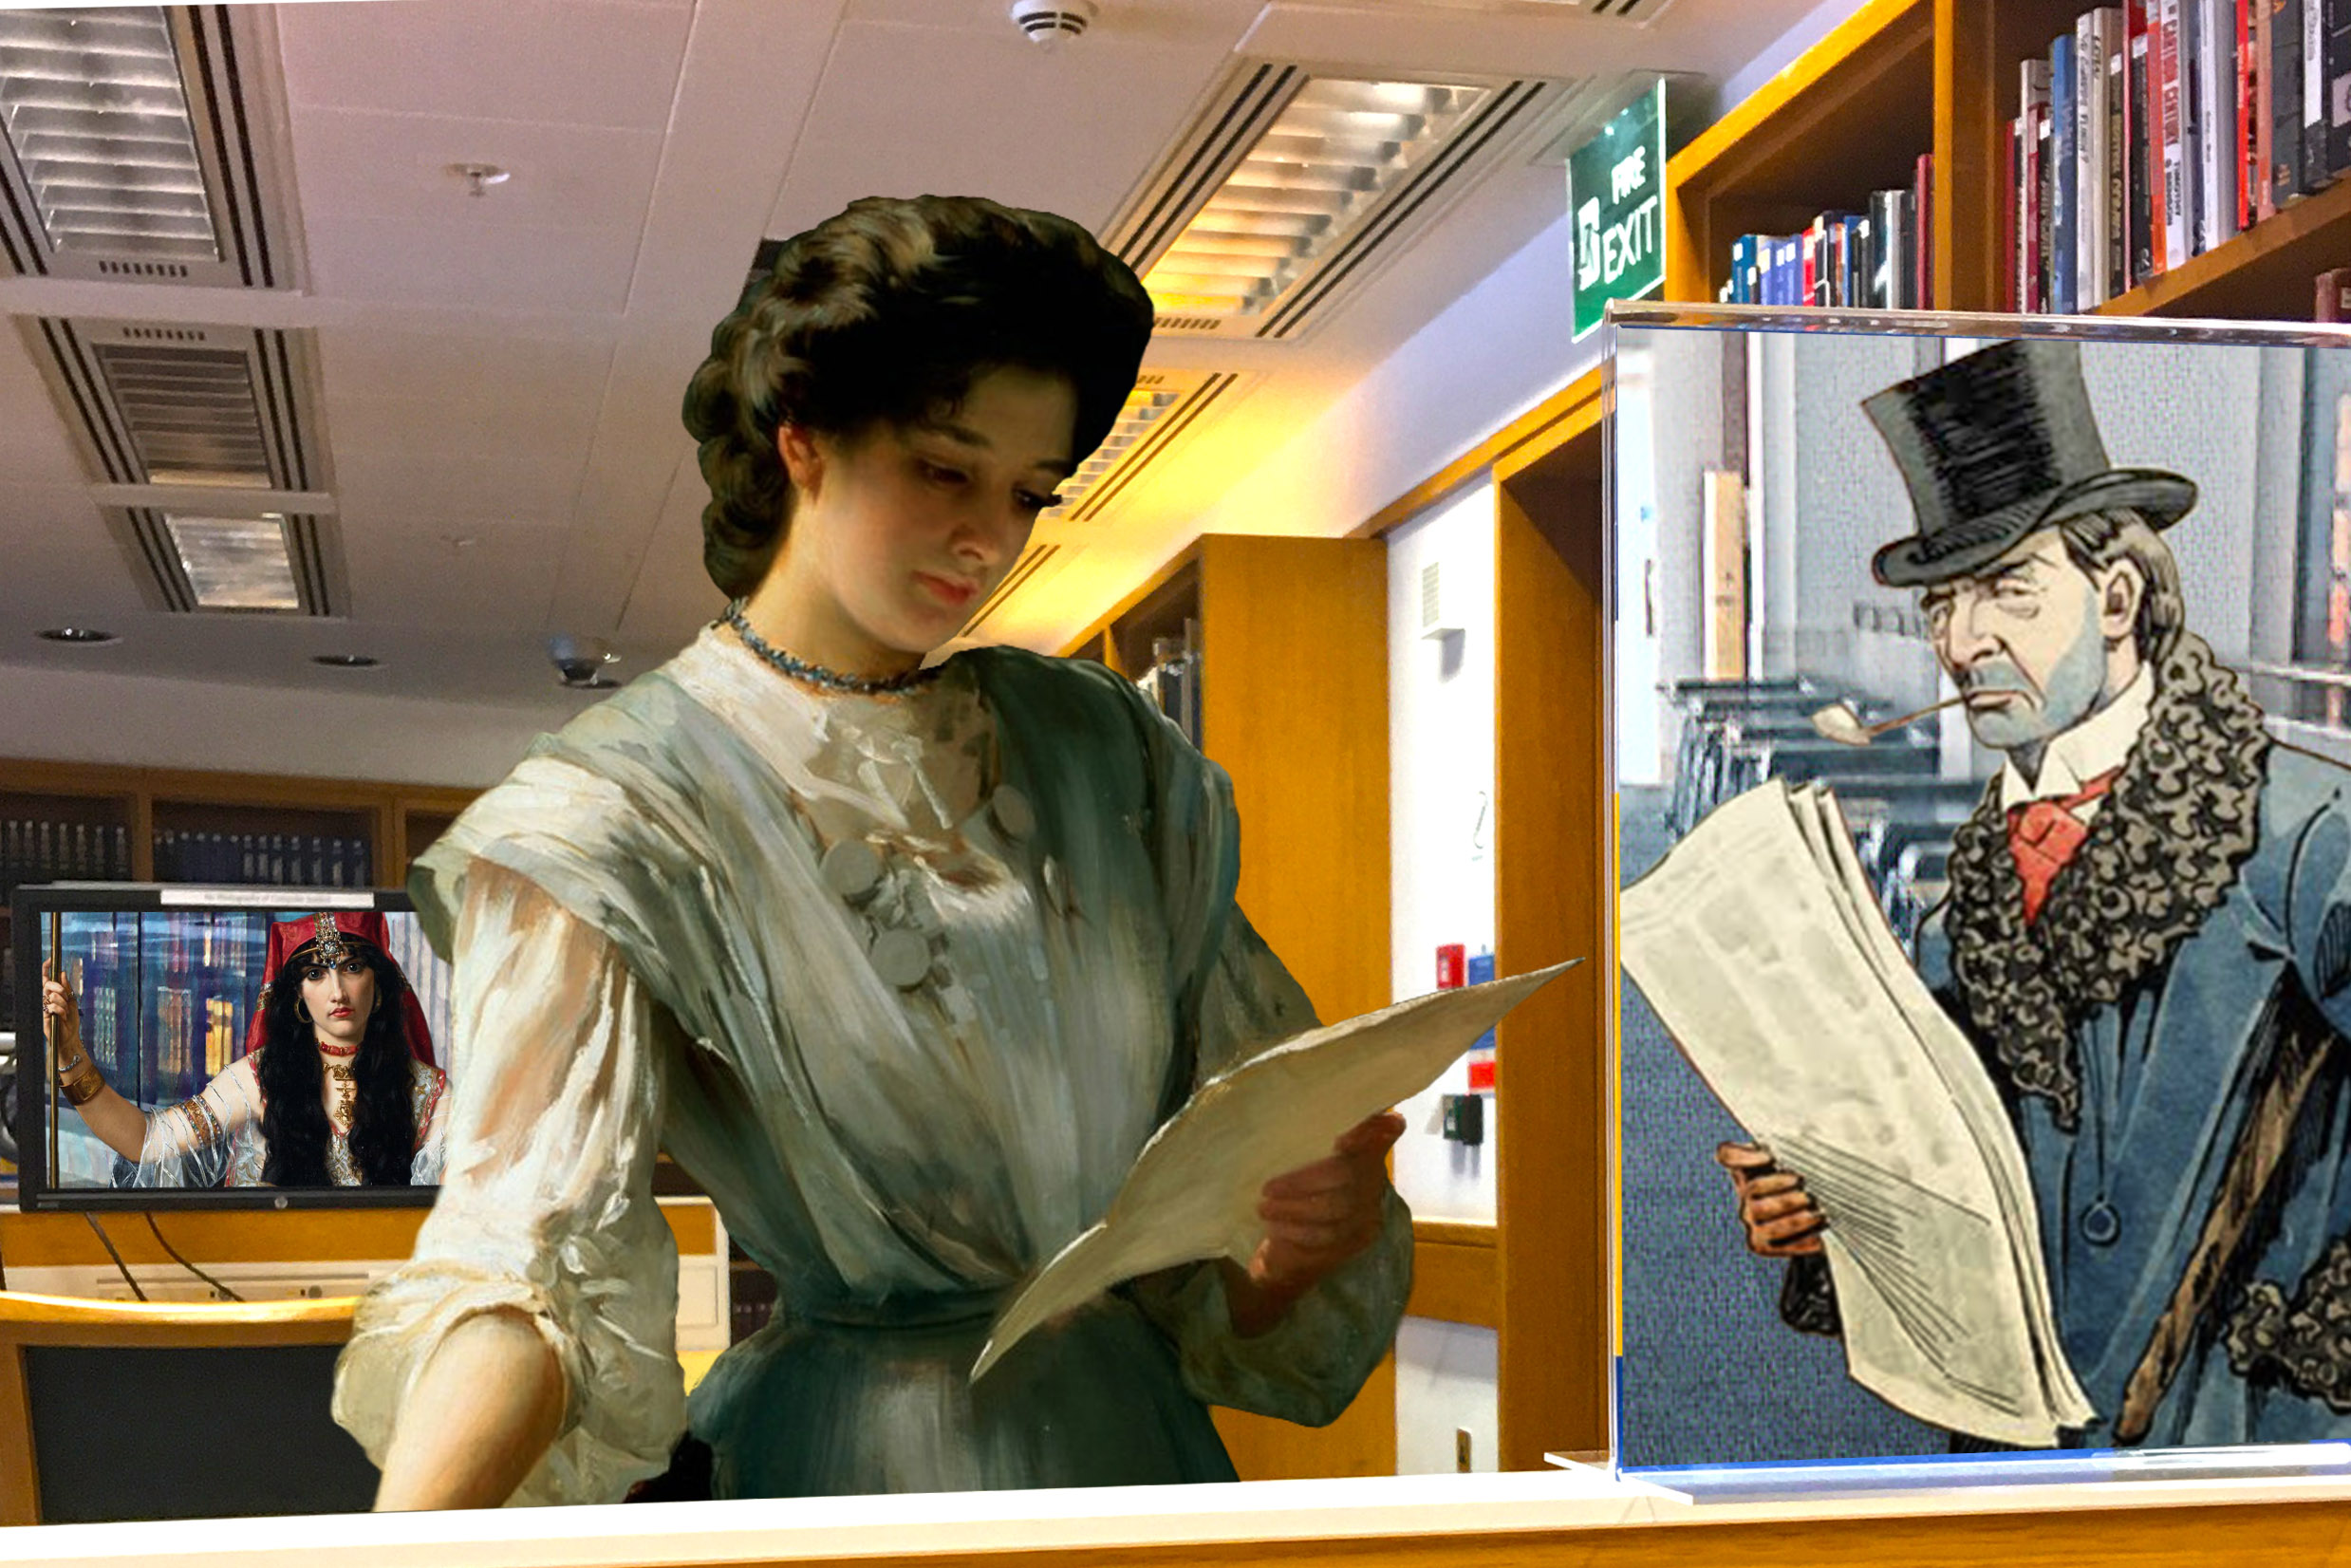 Thomas Benjamin Kennington's "Reading the Letter" (1885) in the Newsroom at the British Library surrounded by My Lockdown Life Day 275 [Joseph Clayton Clark's "A Reader of the Era" (c1900) in the British Library] and My Lockdown Life Day 391 [Georges Merle’s “L’Envoûteuse” (The Sorceress) (1883) in front of the King's Library at the British Library]